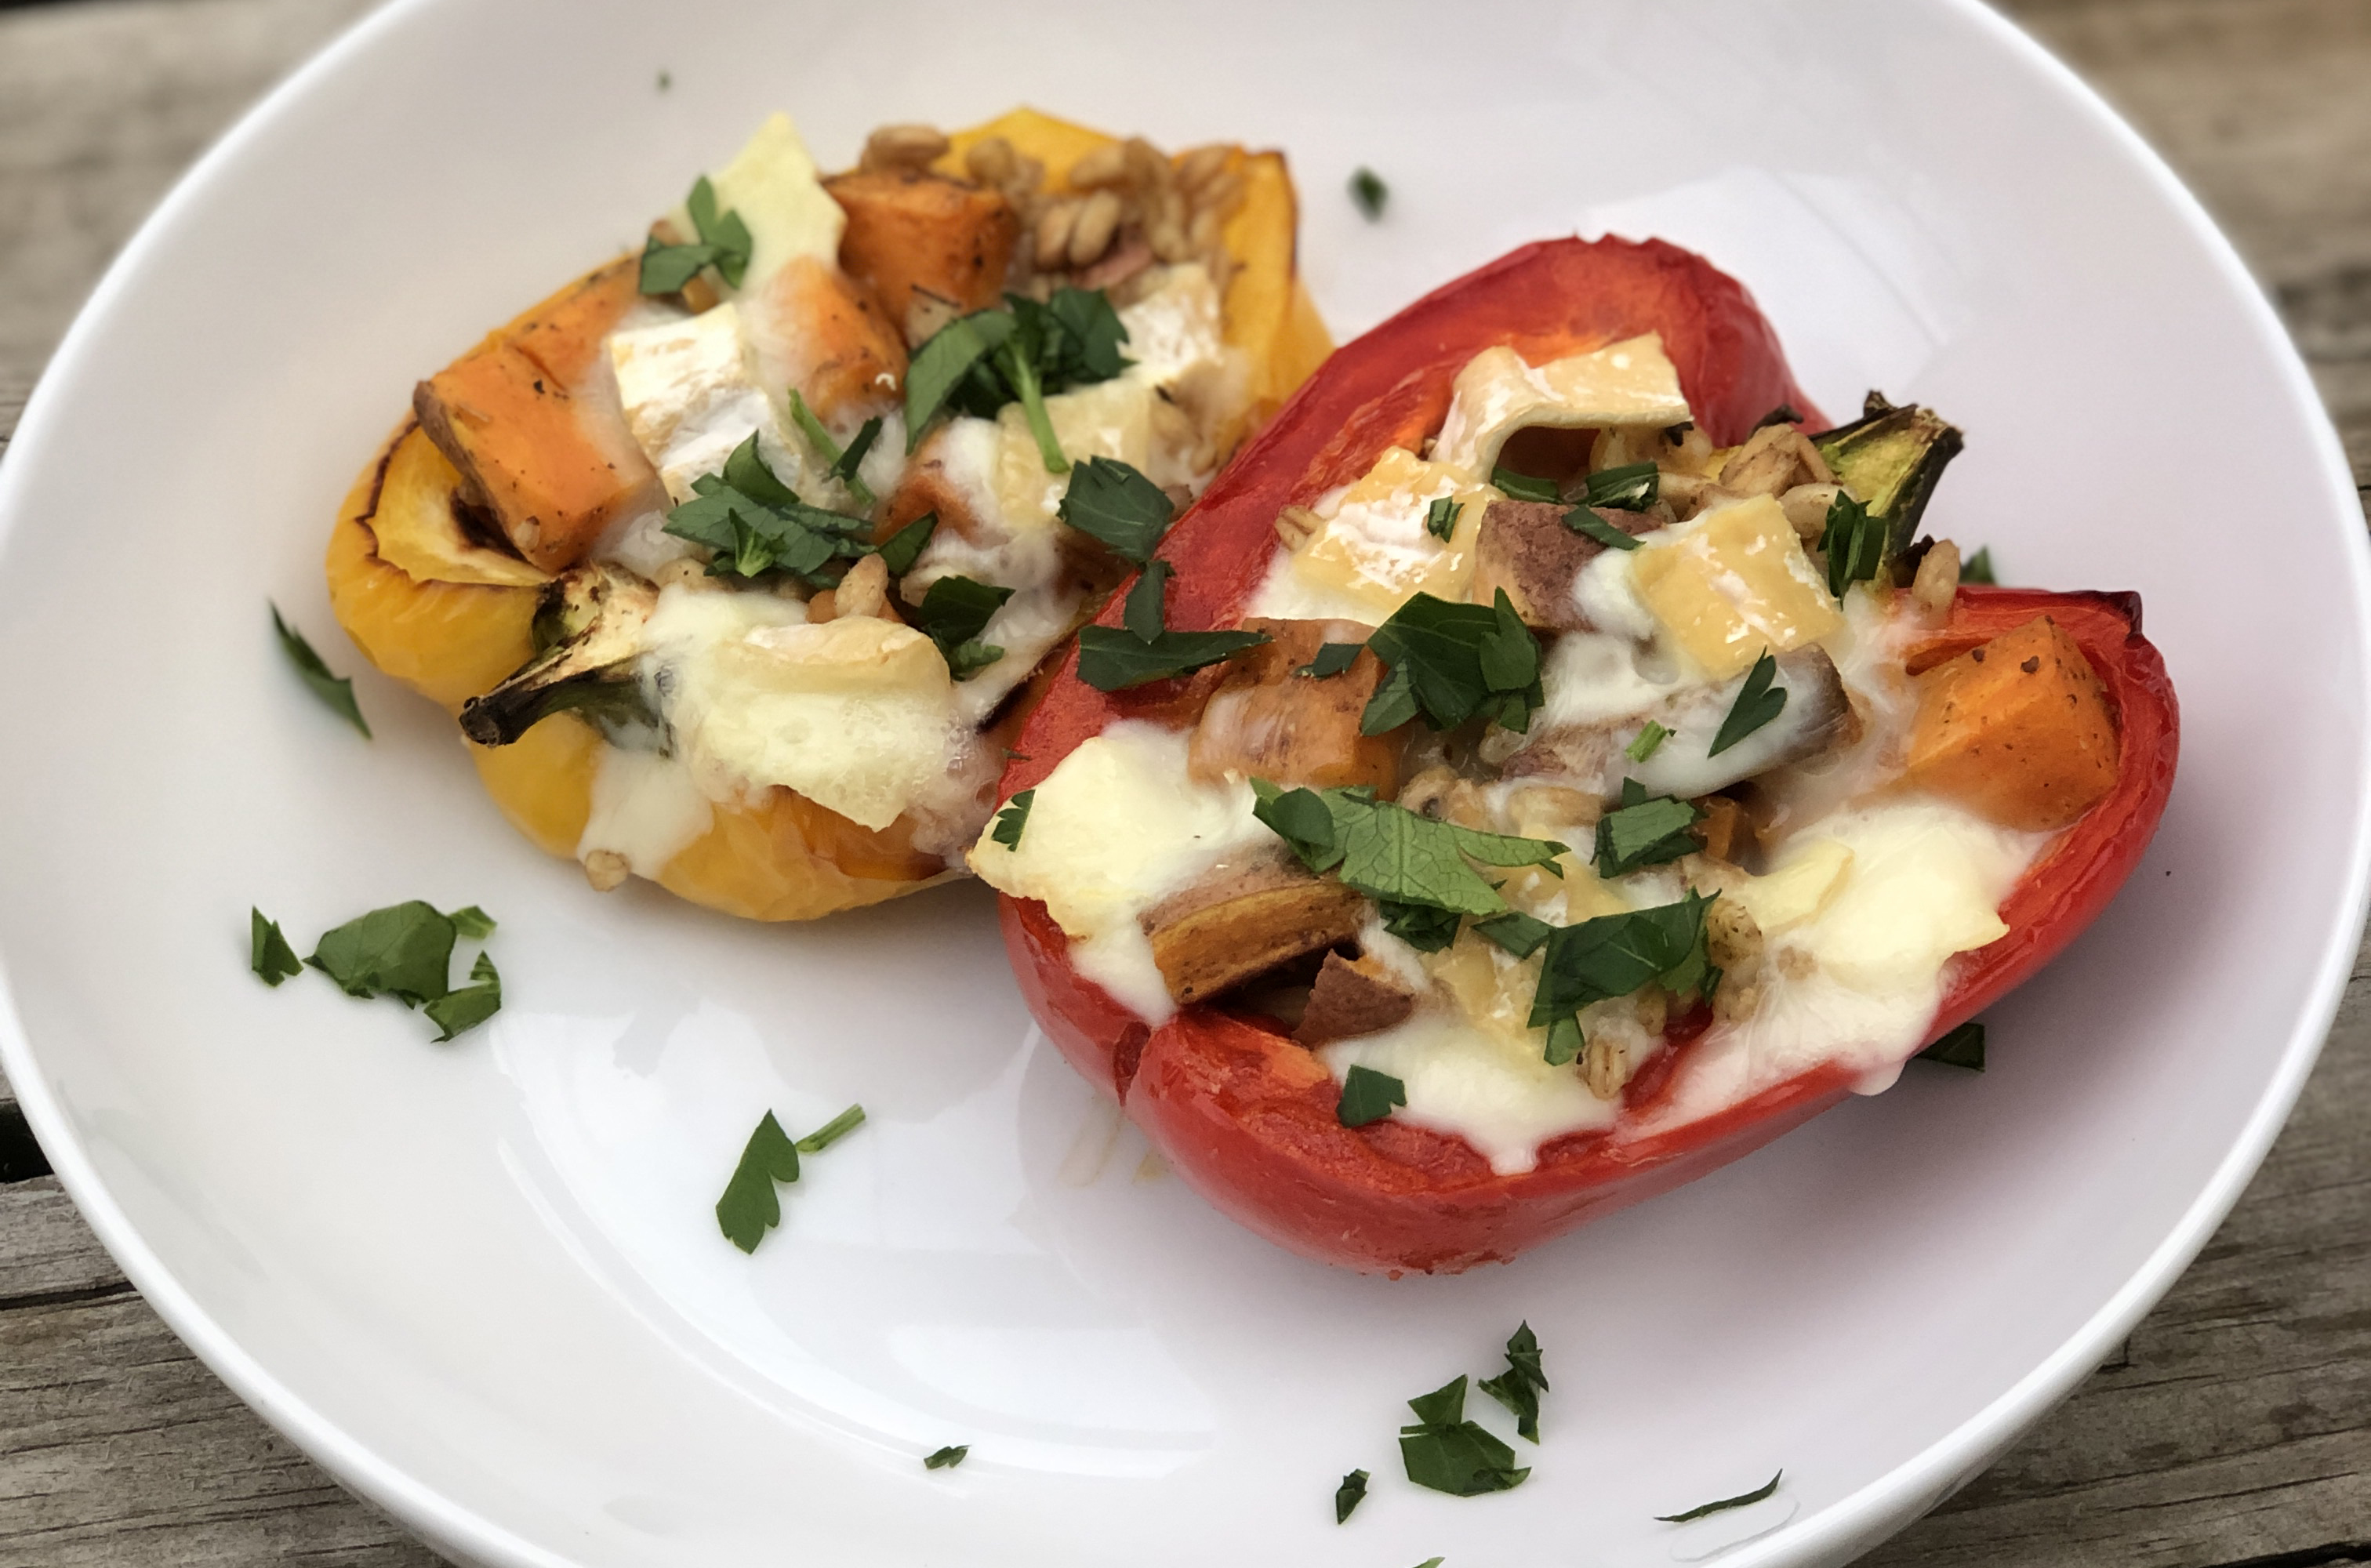 Try this vegetarian stuffed peppers recipe with sweet potatoes, farro and blended milk cheese by Green Dirt Farm.